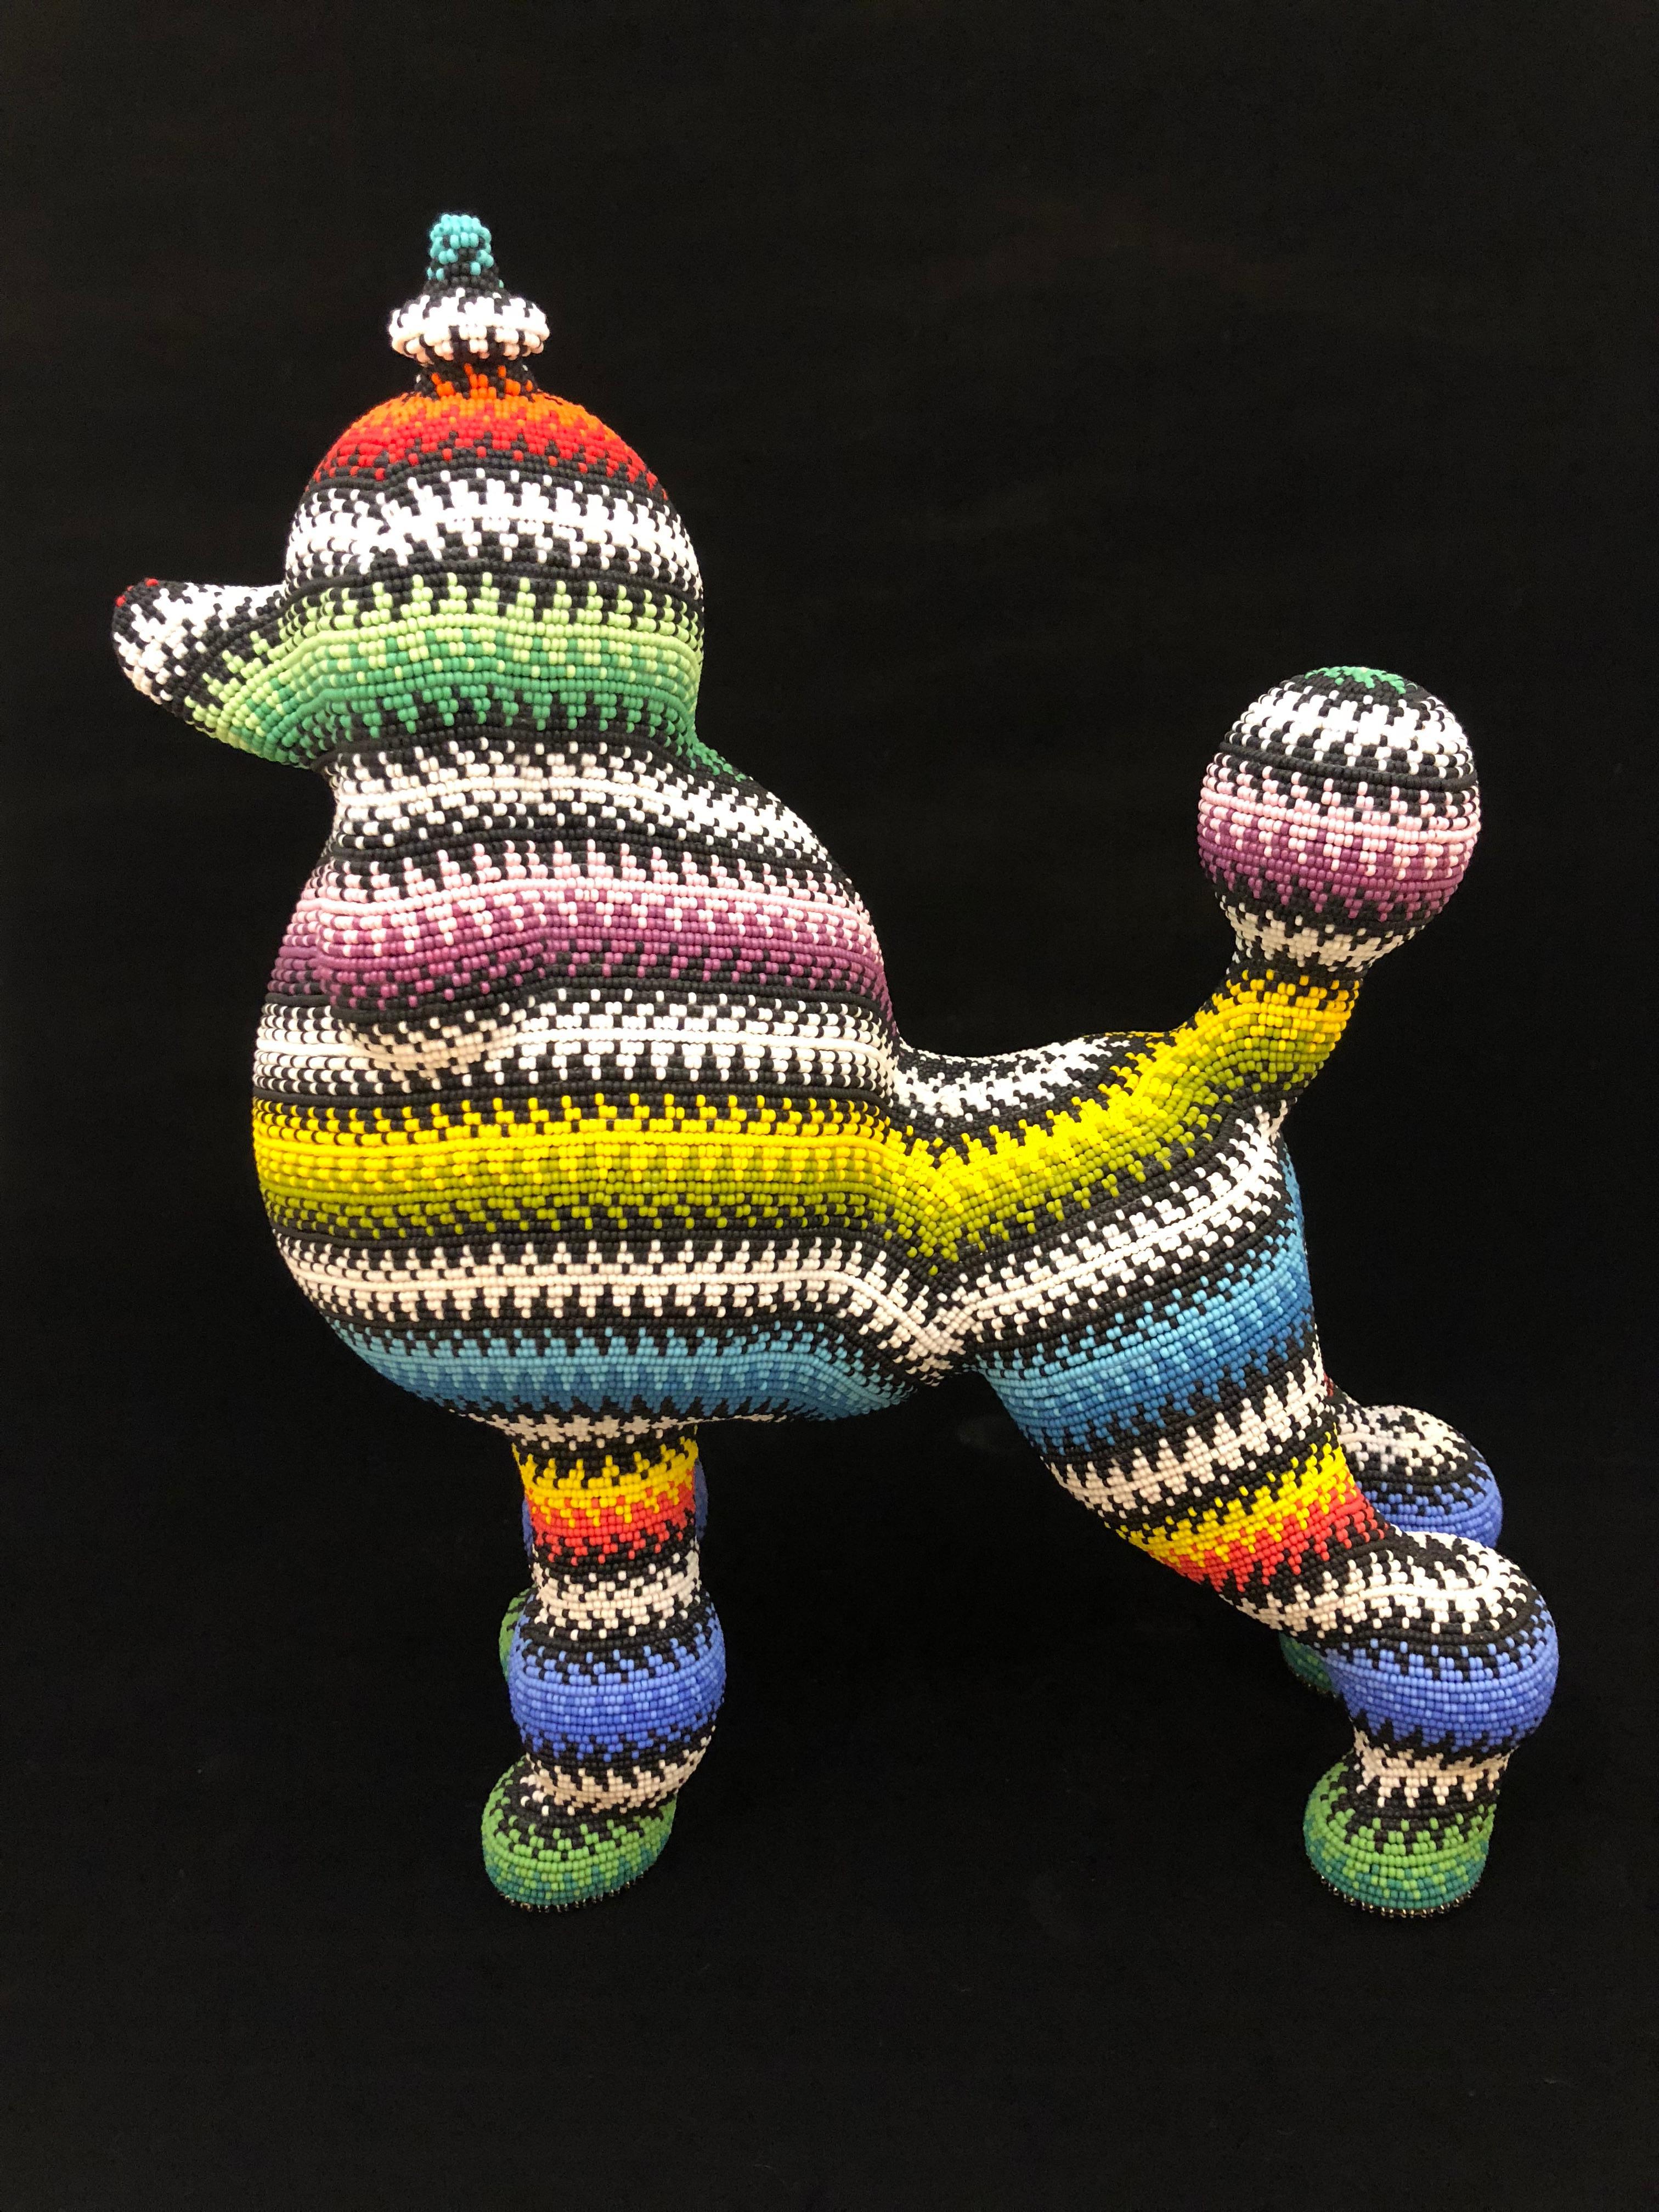 Poodle Form Covered in Glass Czech Seed Beads - Pop Art Mixed Media Art by Jan Huling